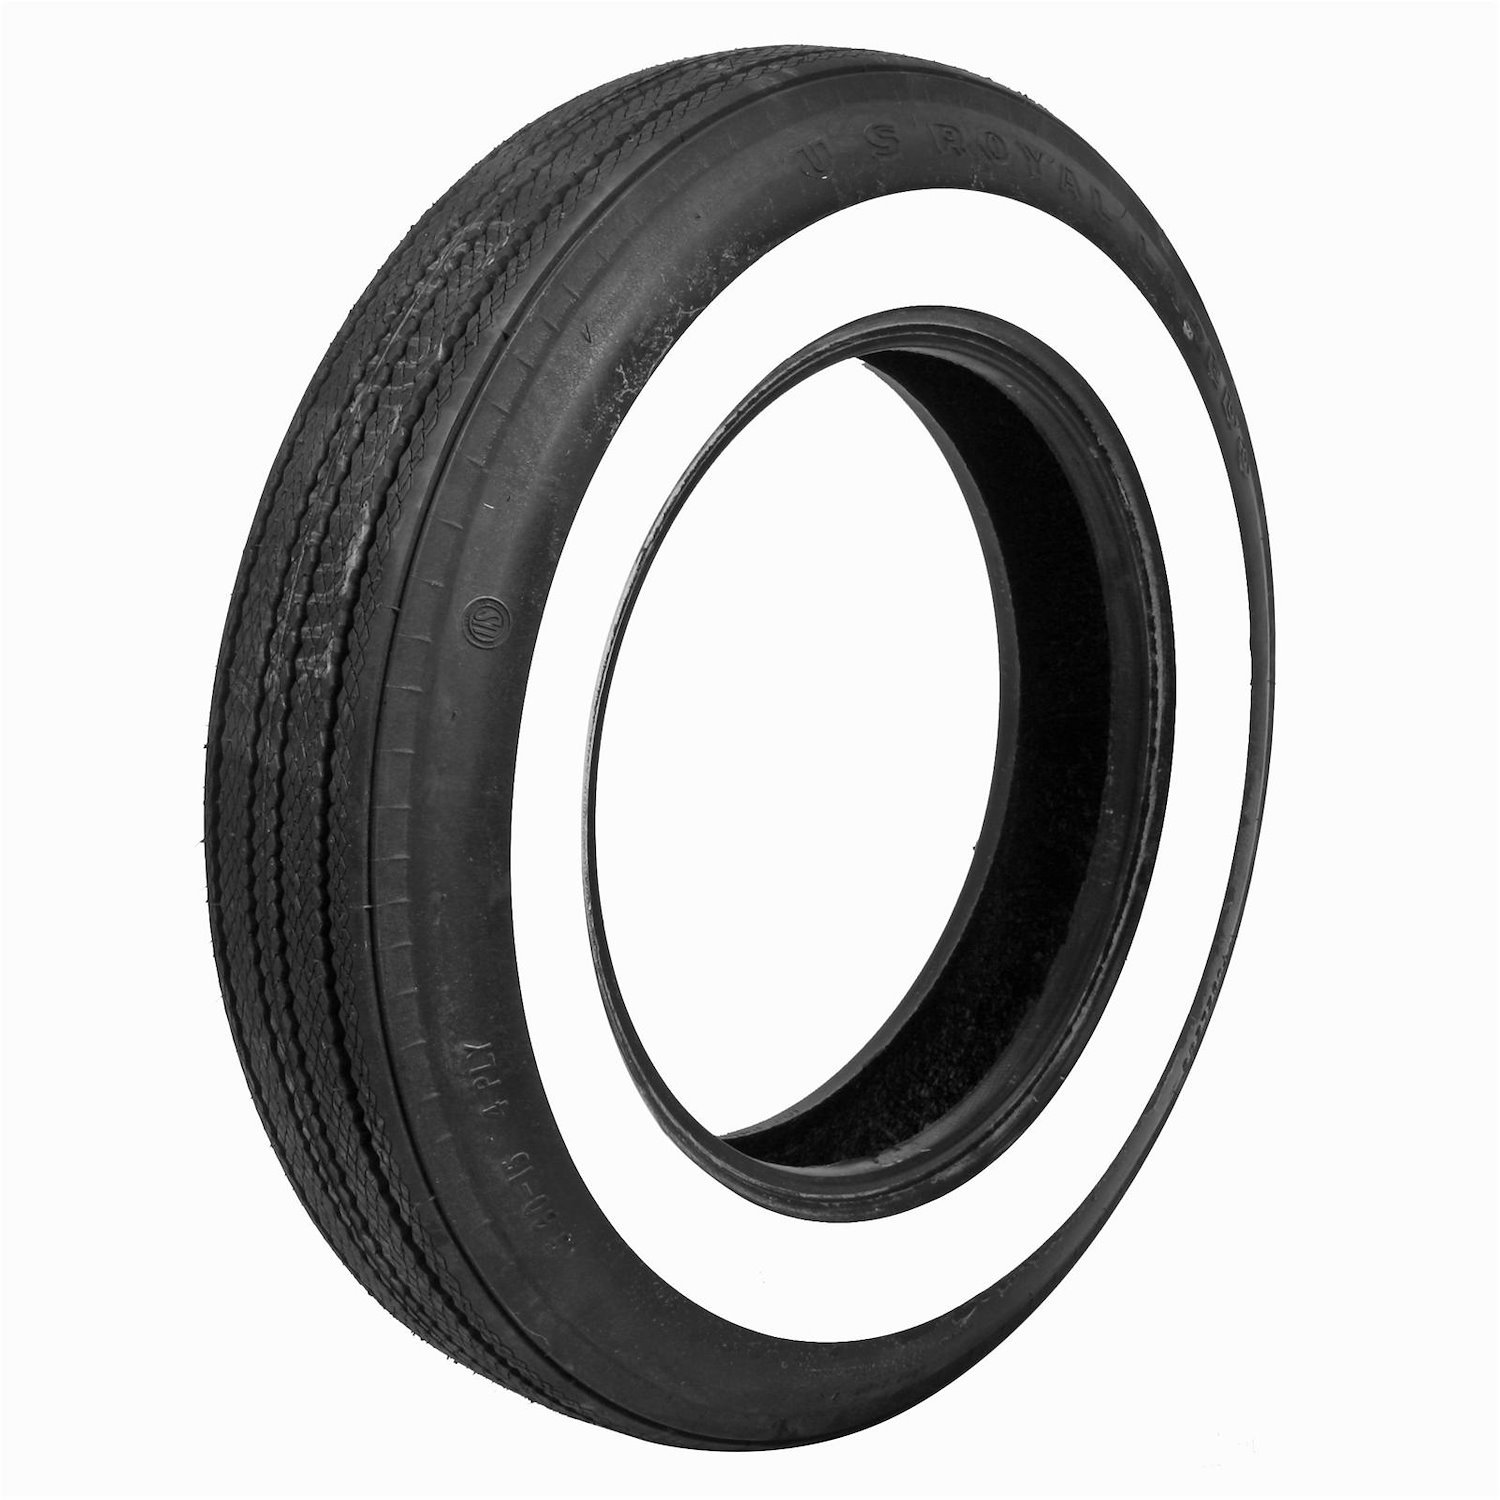 55675 Tire, US Royal 2.25-Inch Whitewall, 560-15